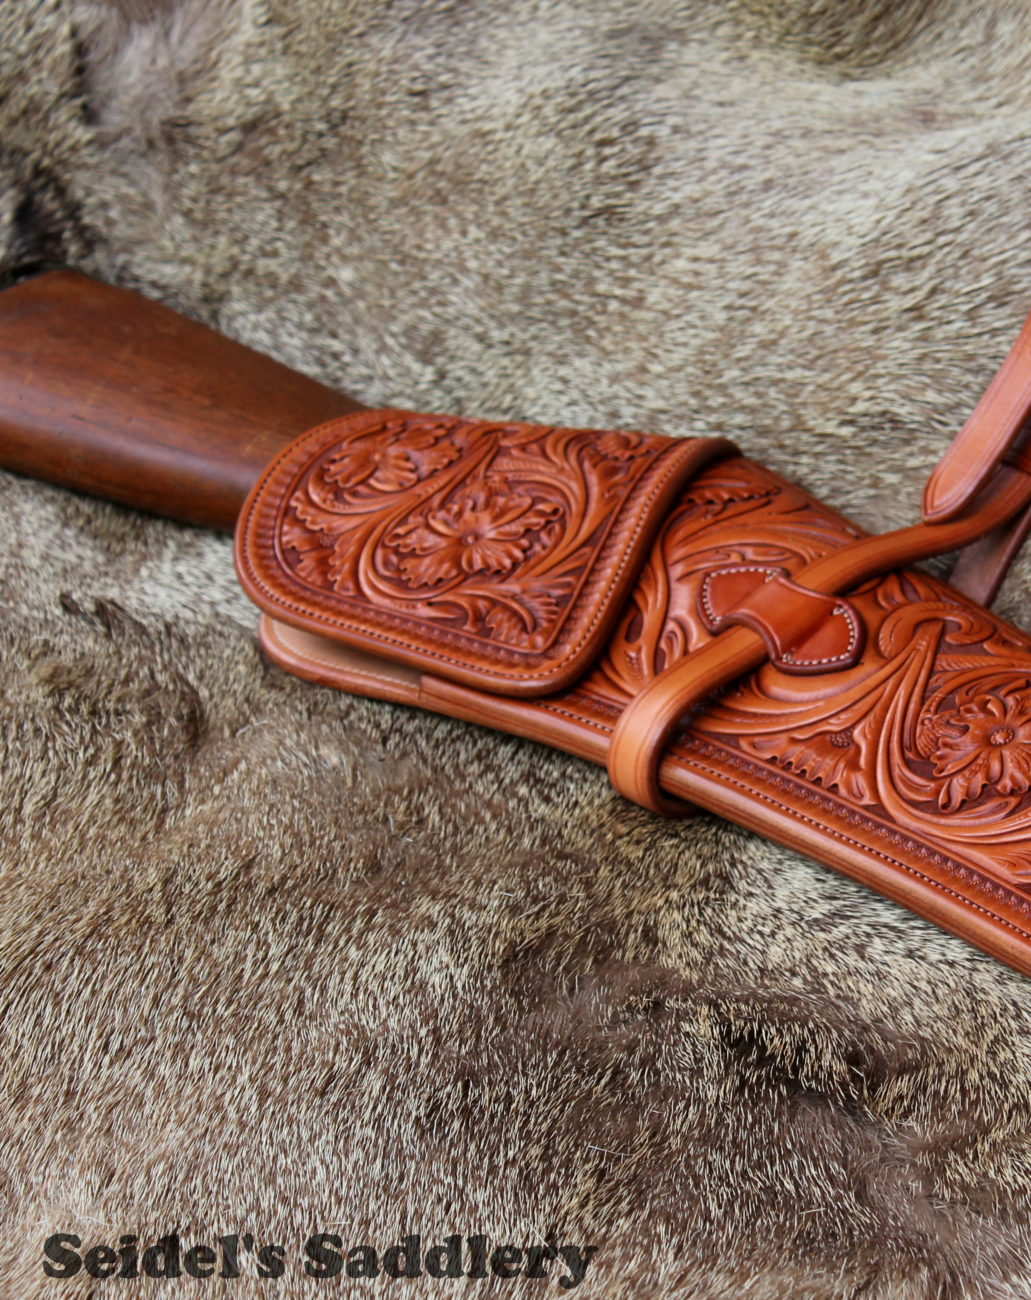 Rifle Scabbard - Sorrel Brown Leather 30/30